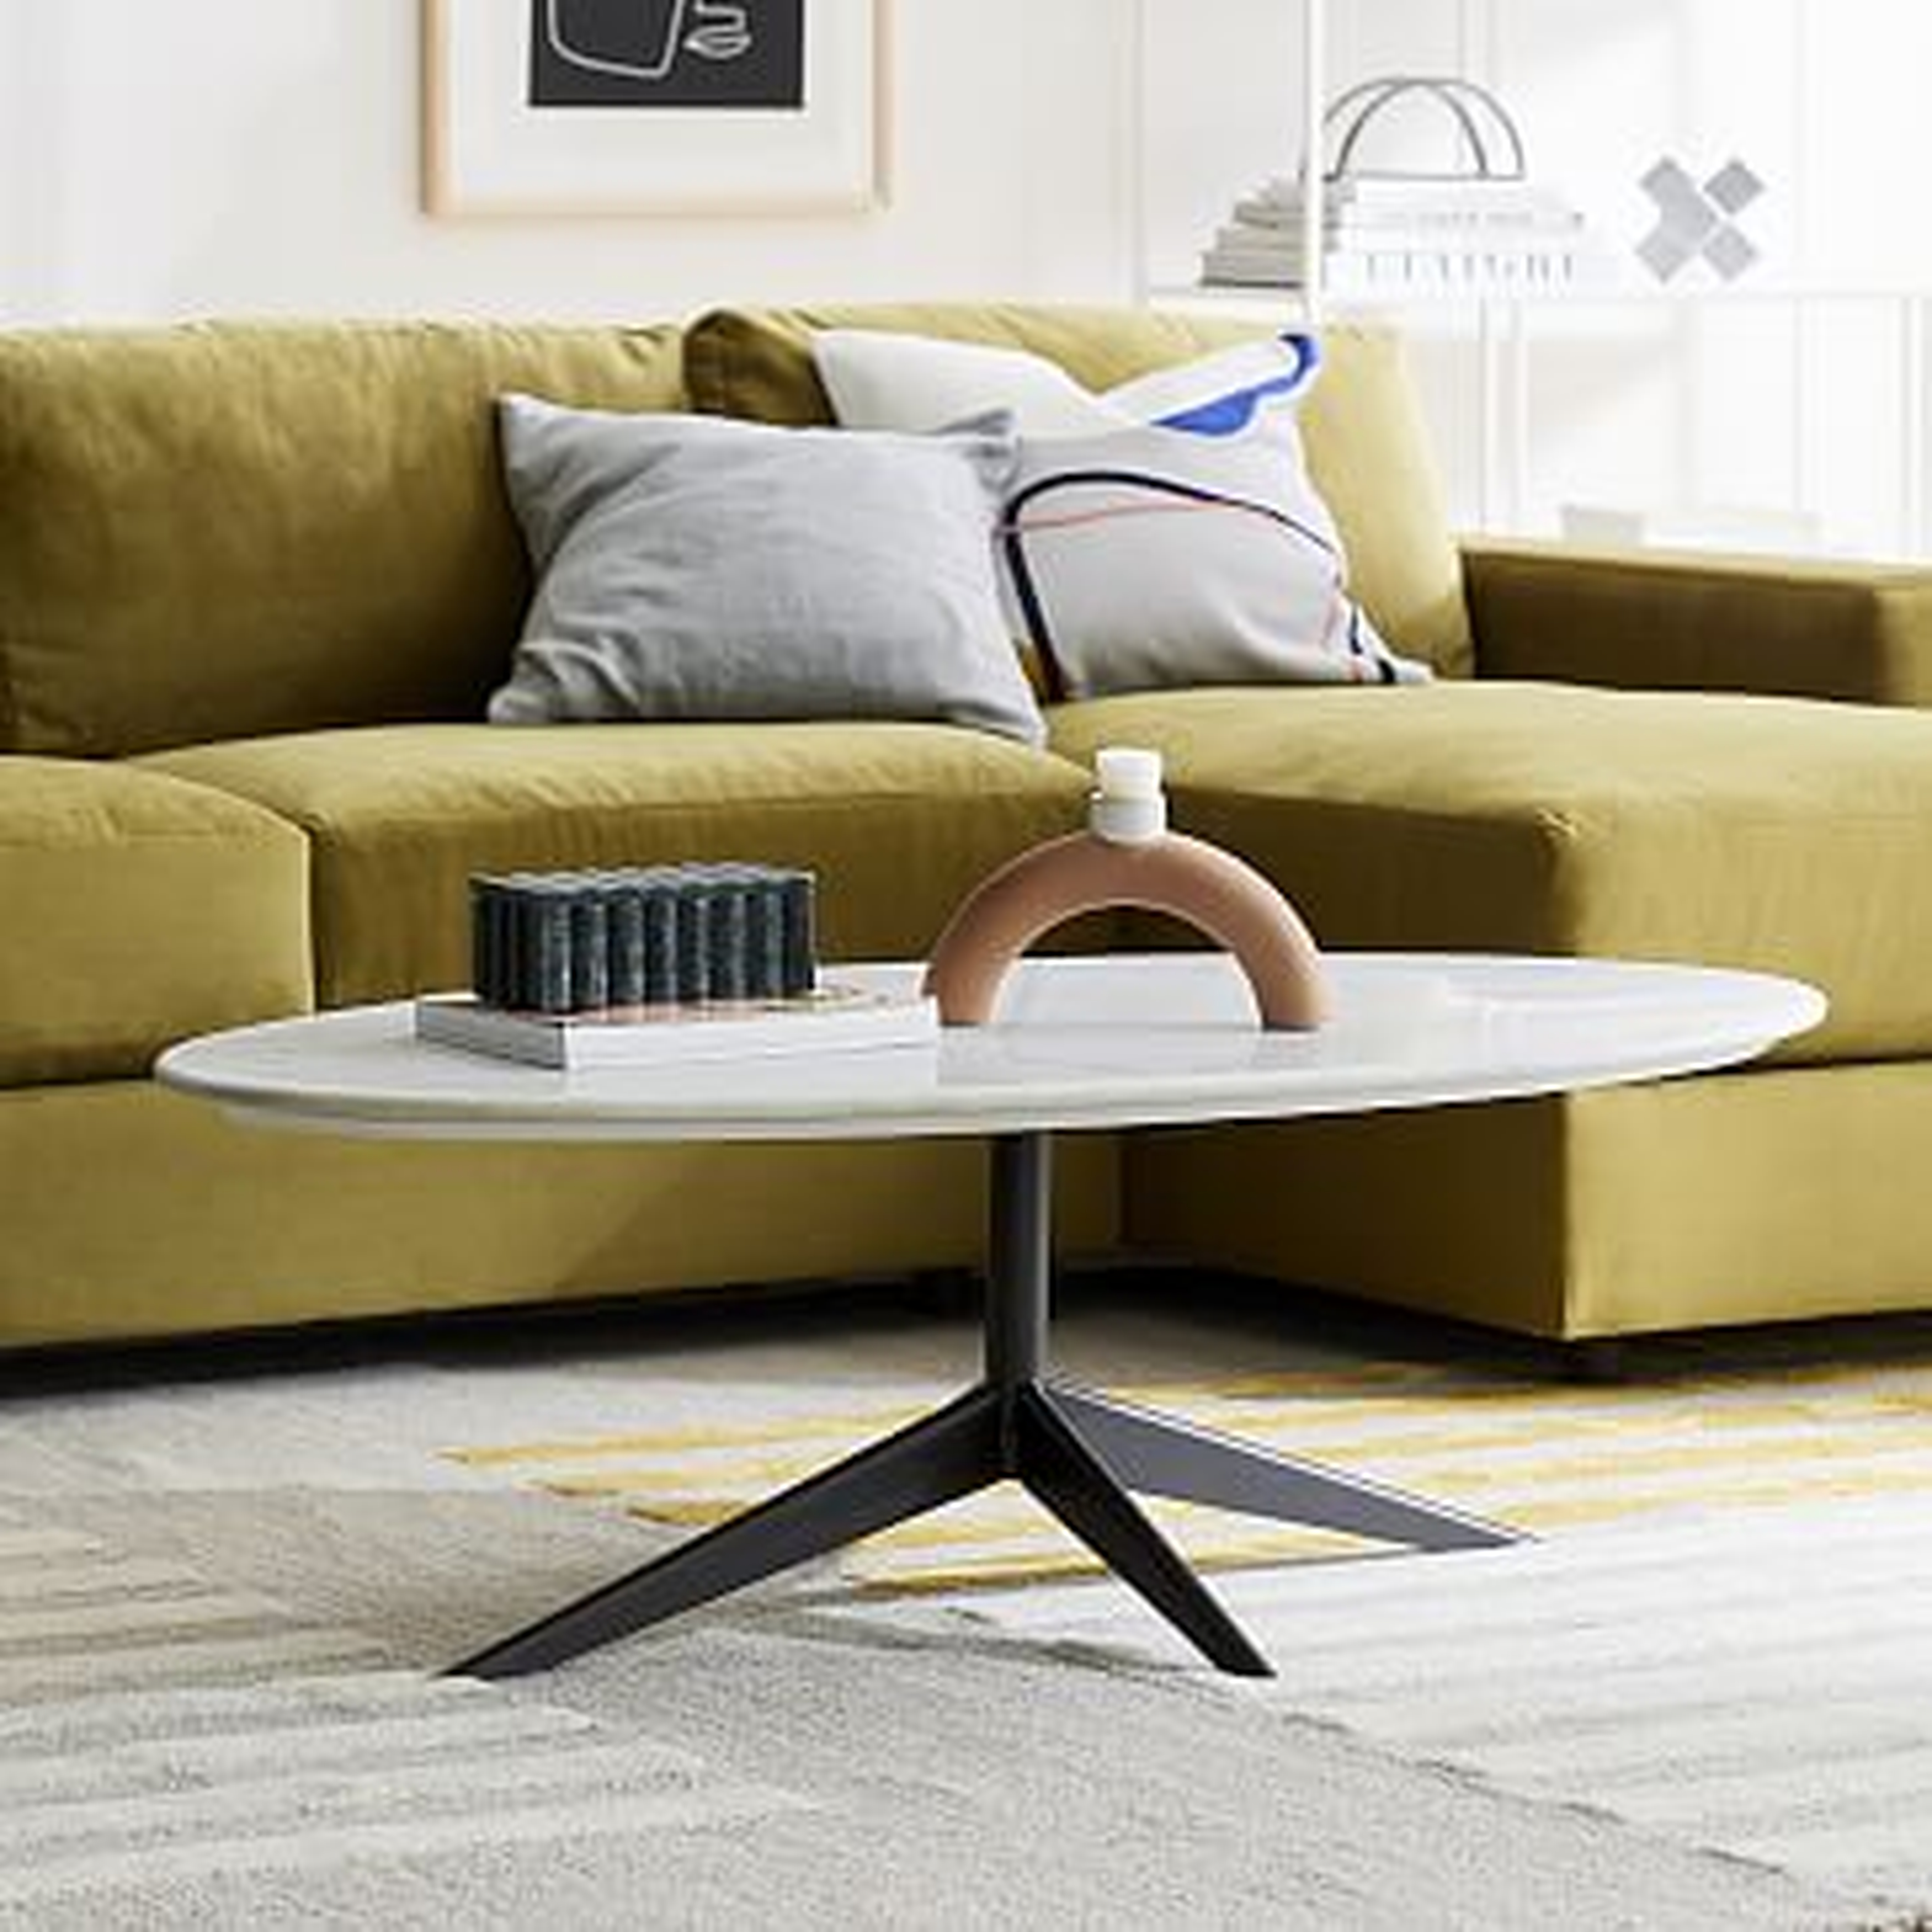 Marlow Oval Coffee Table, Marble - West Elm